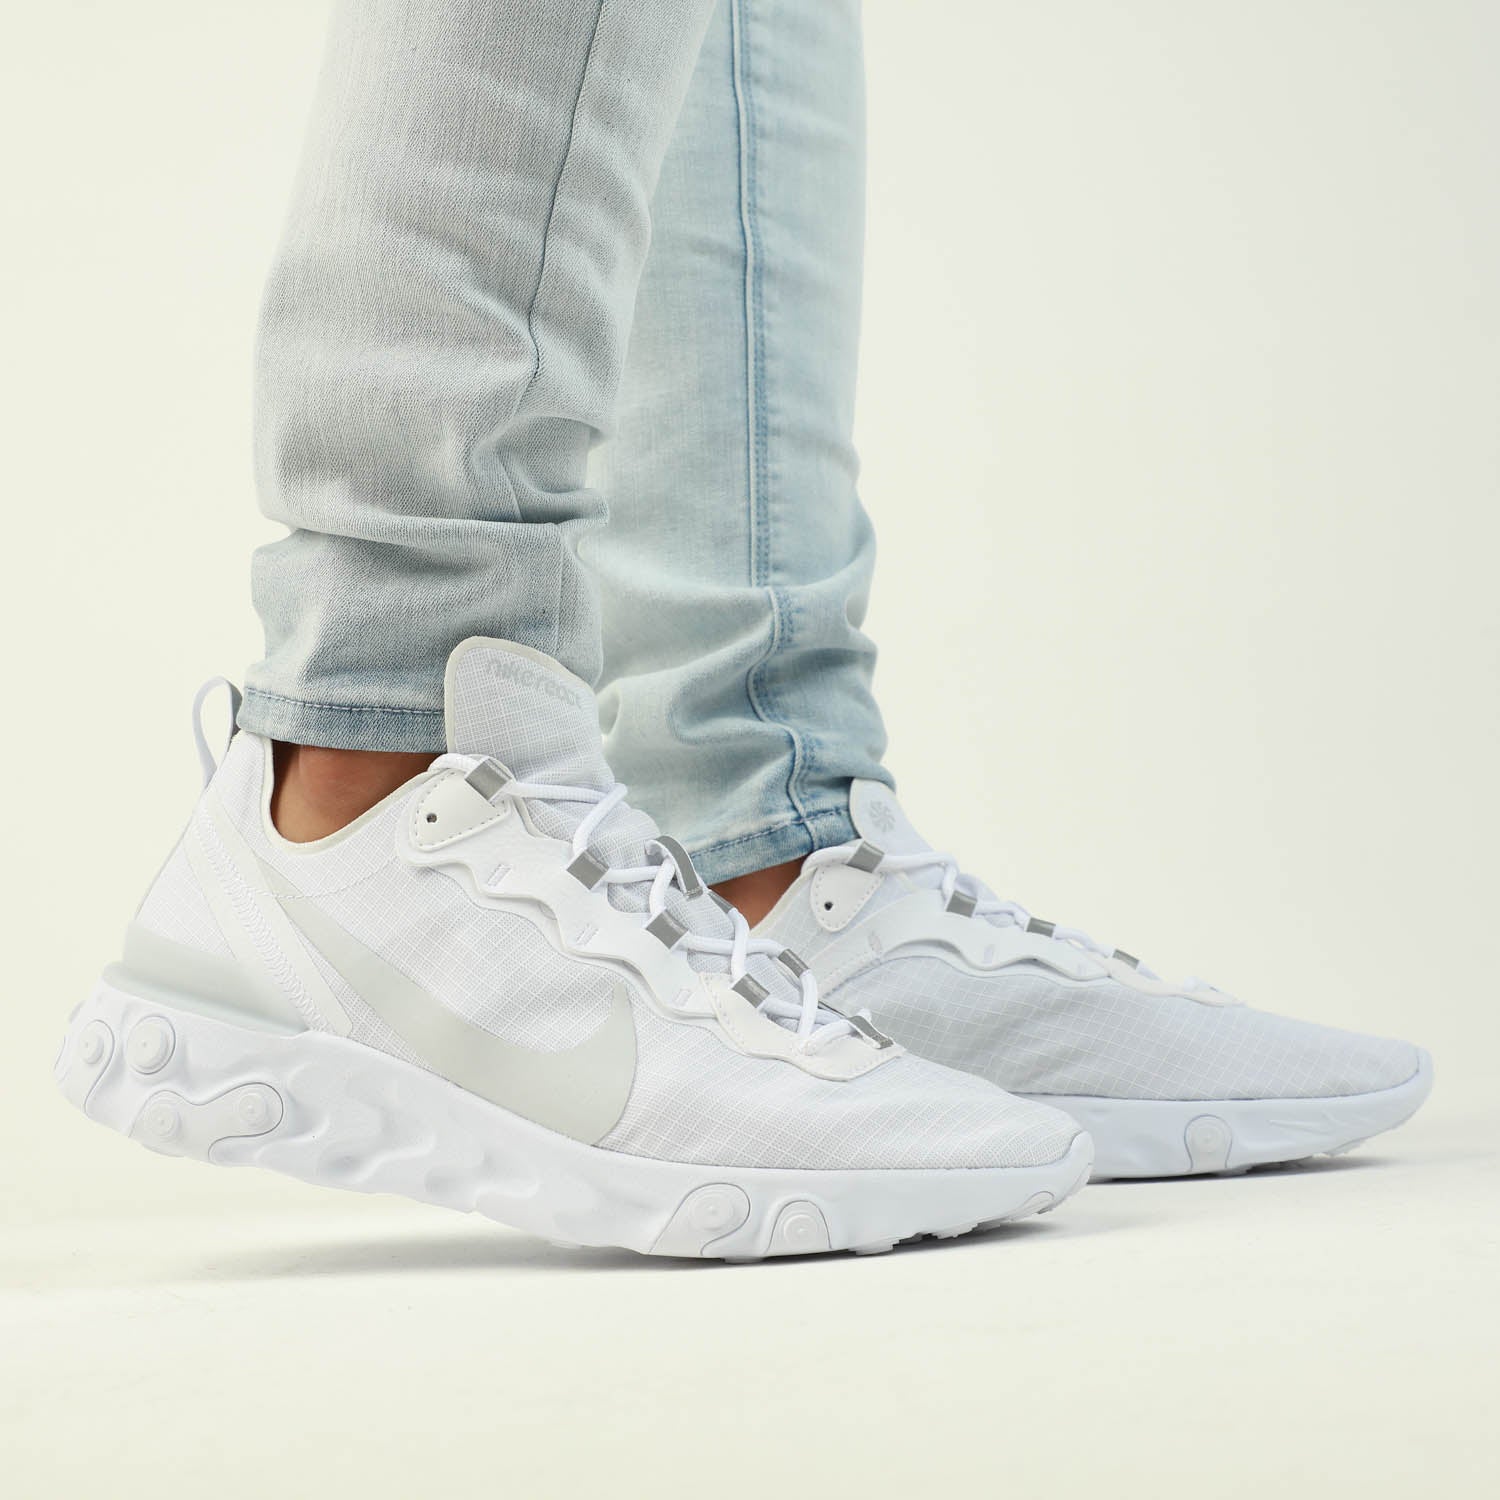 nike react element 55 fit